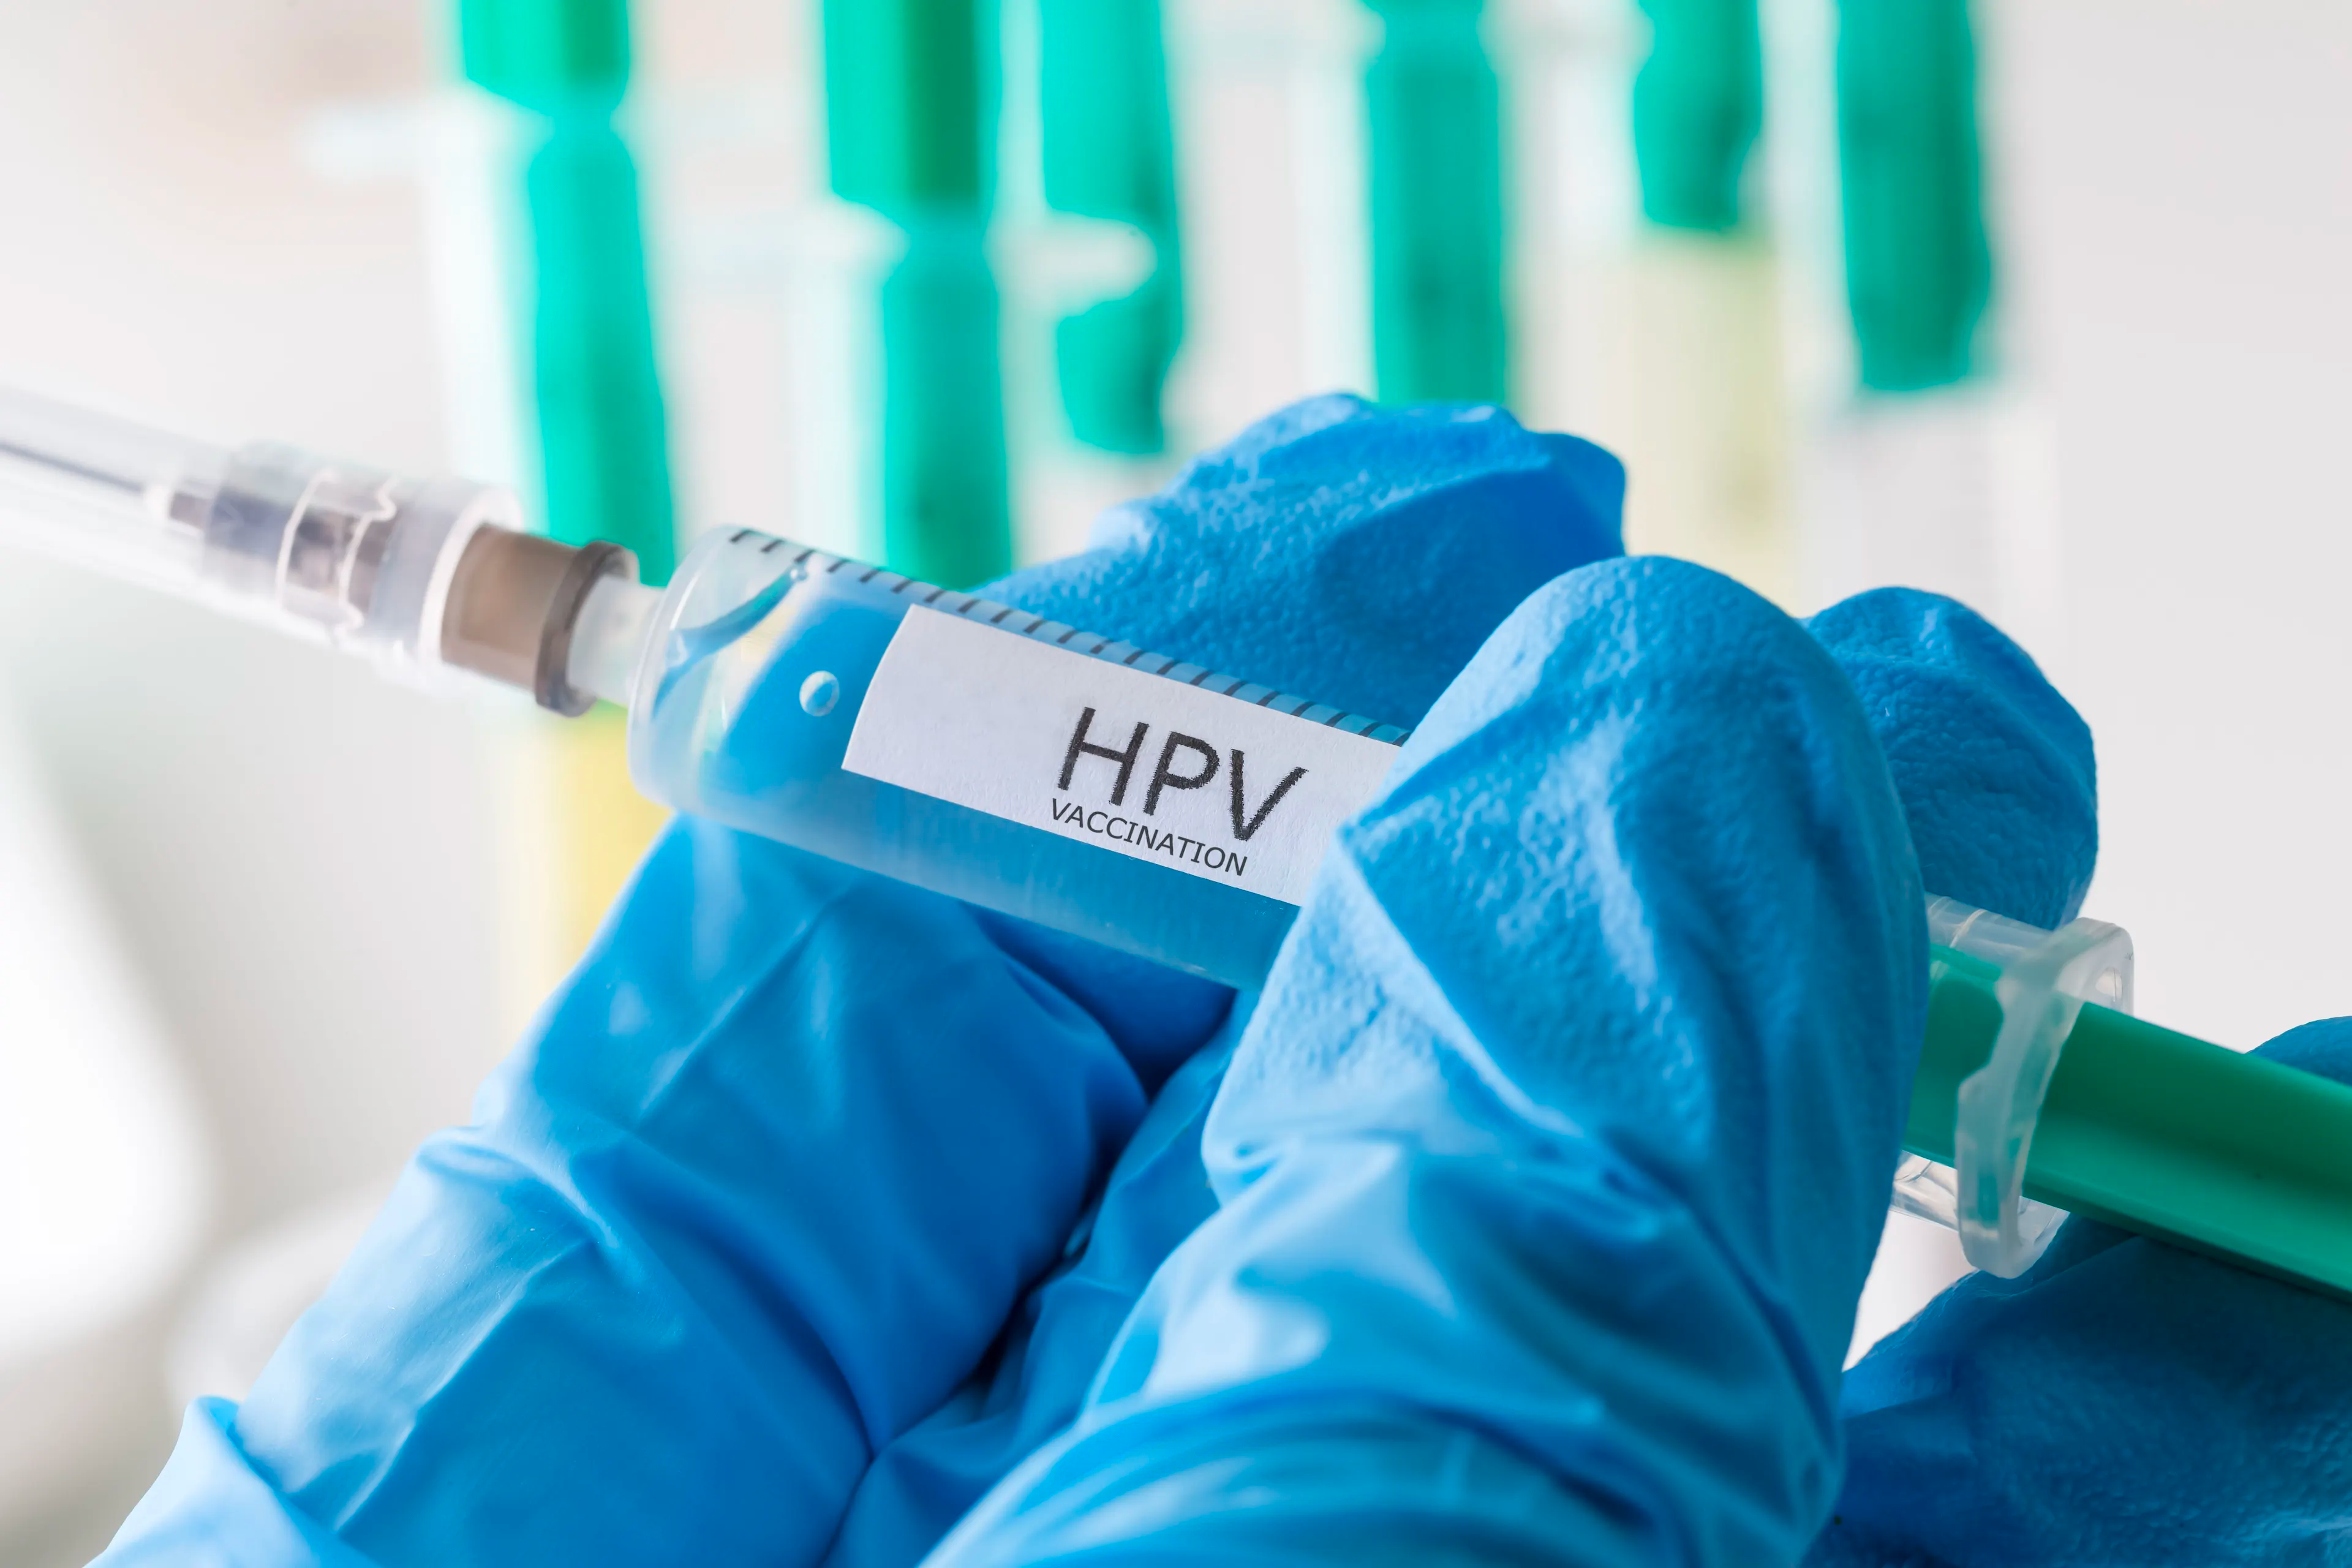 Primary care visits fail to impact parental knowledge and attitudes on HPV vaccination: RAVE study findings | Image Credit: © Tobias Arhelger - © Tobias Arhelger - stock.adobe.com.